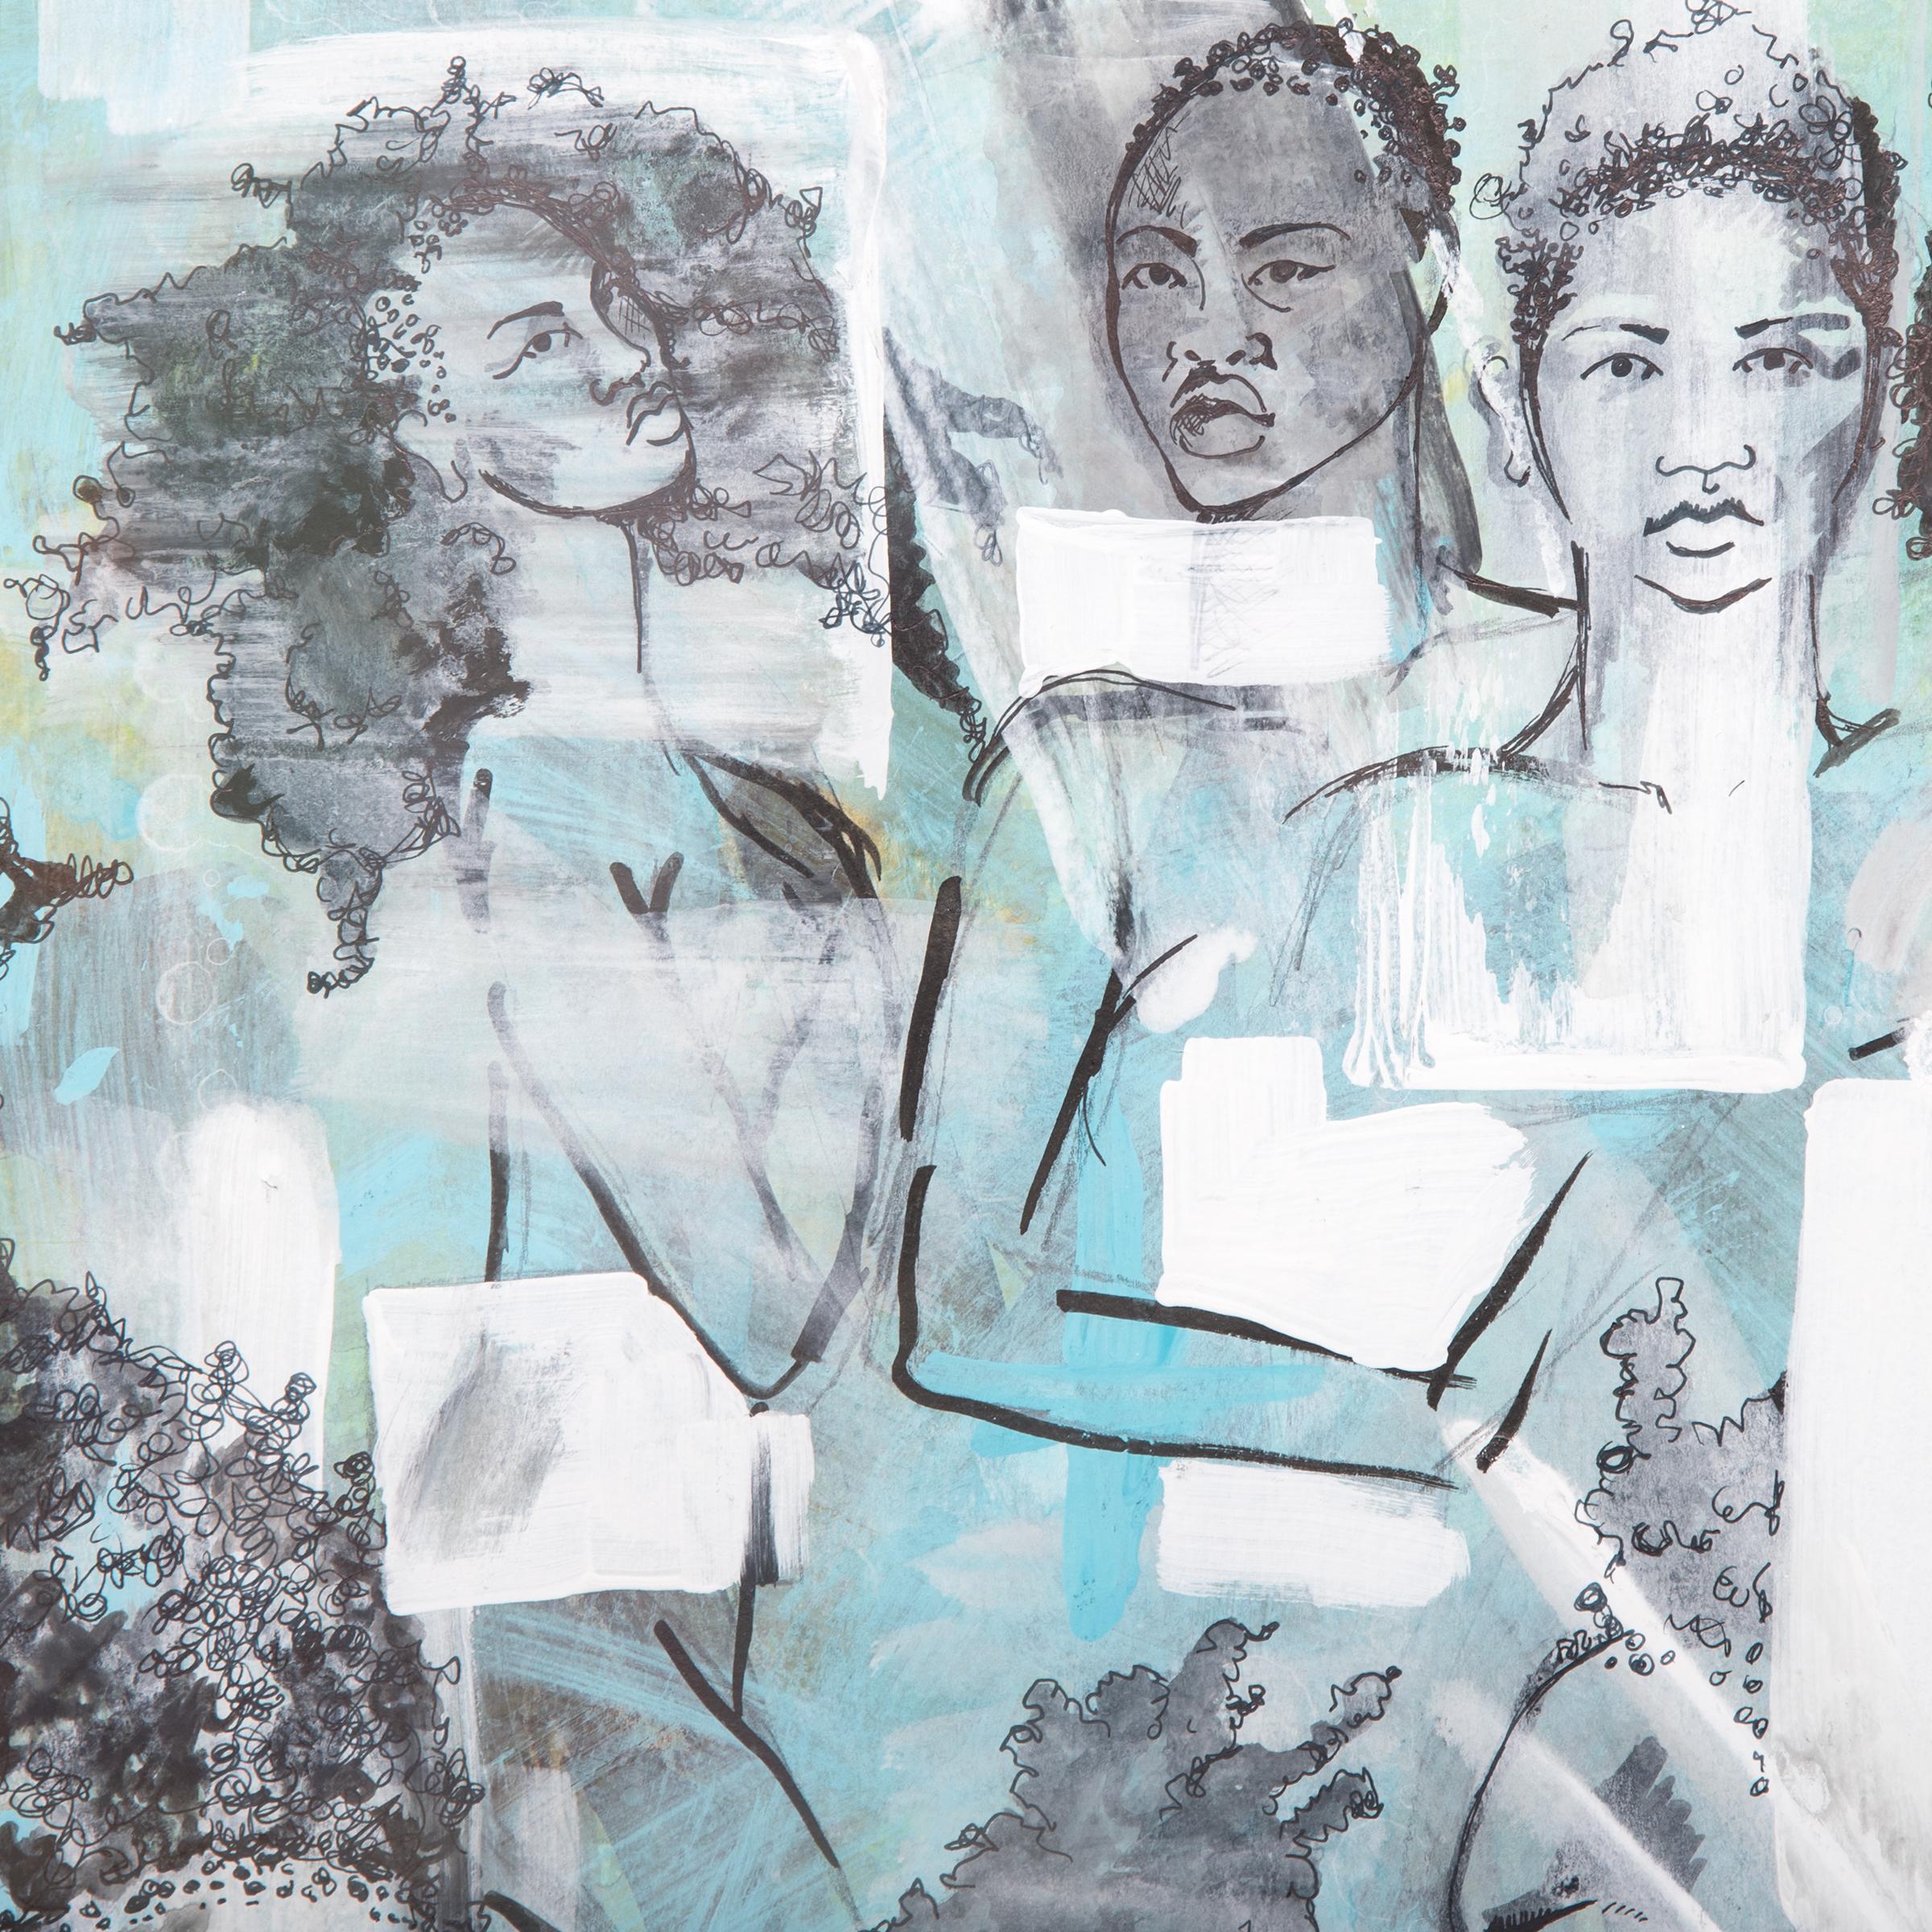 Tracy Crump uses washes of grey, white and aqua to both conceal and reveal sensitively drawn figures. Each figure stands alone as an individual, possessing unique features and hairstyles, yet, as the title of the series suggests the men and women